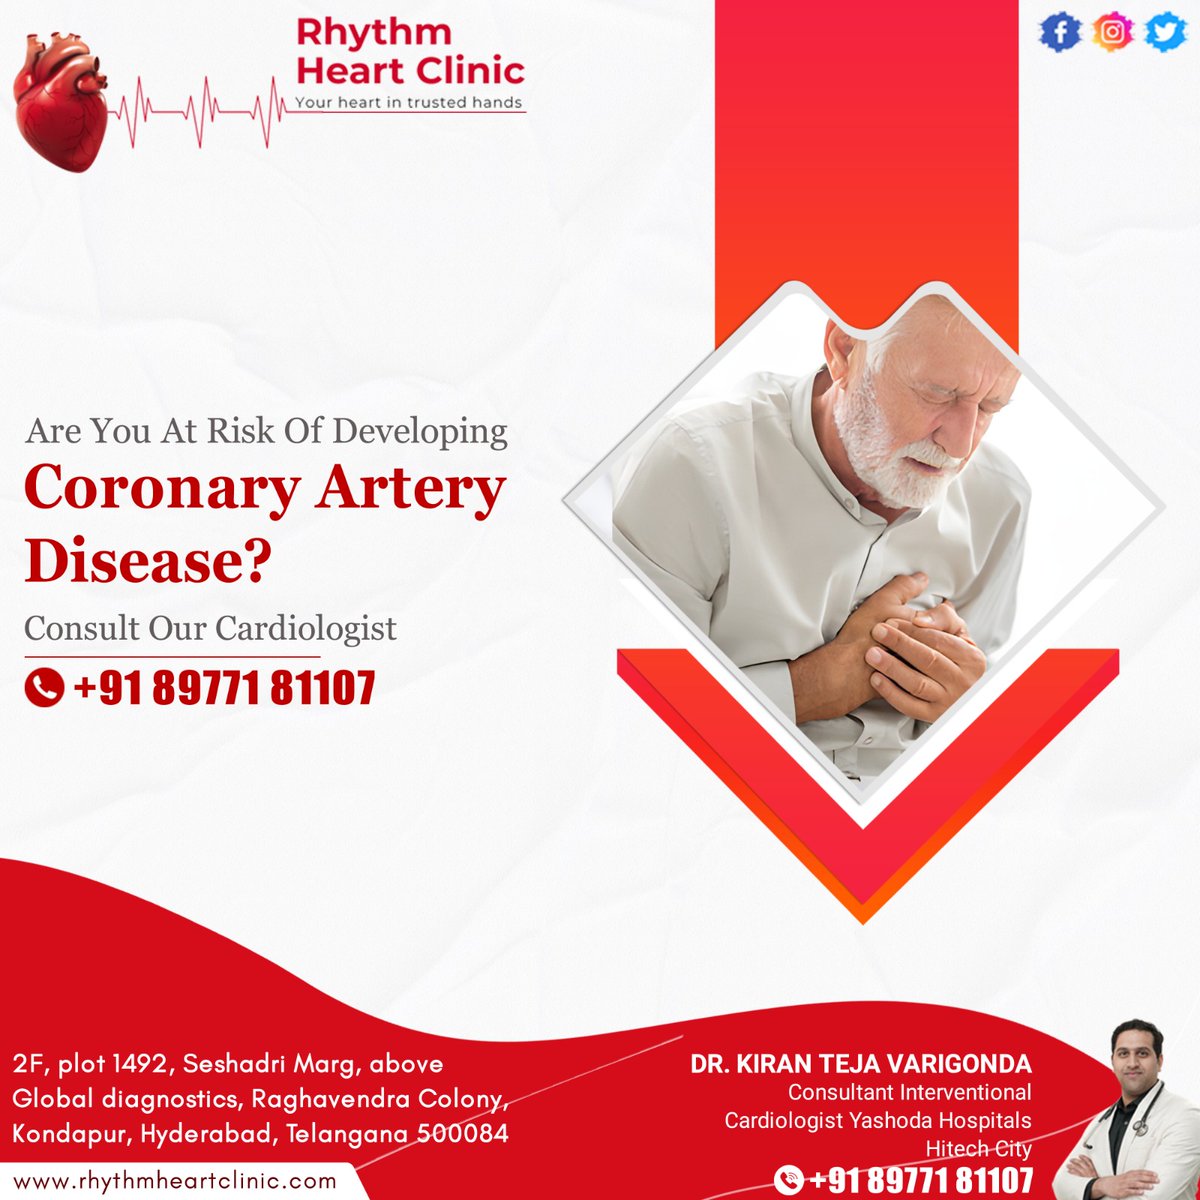 Concerned about #CoronaryArtery Disease?
Consult our #Cardiologist today for #expert guidance and personalized care. Your #hearthealth matters.'

#DrKiranTejaVarigonda #ConsultantInterventionalCardiologist #RhythmHeartClinic #YashodaHospital #Kondapur #Hyderabad #Cardiology